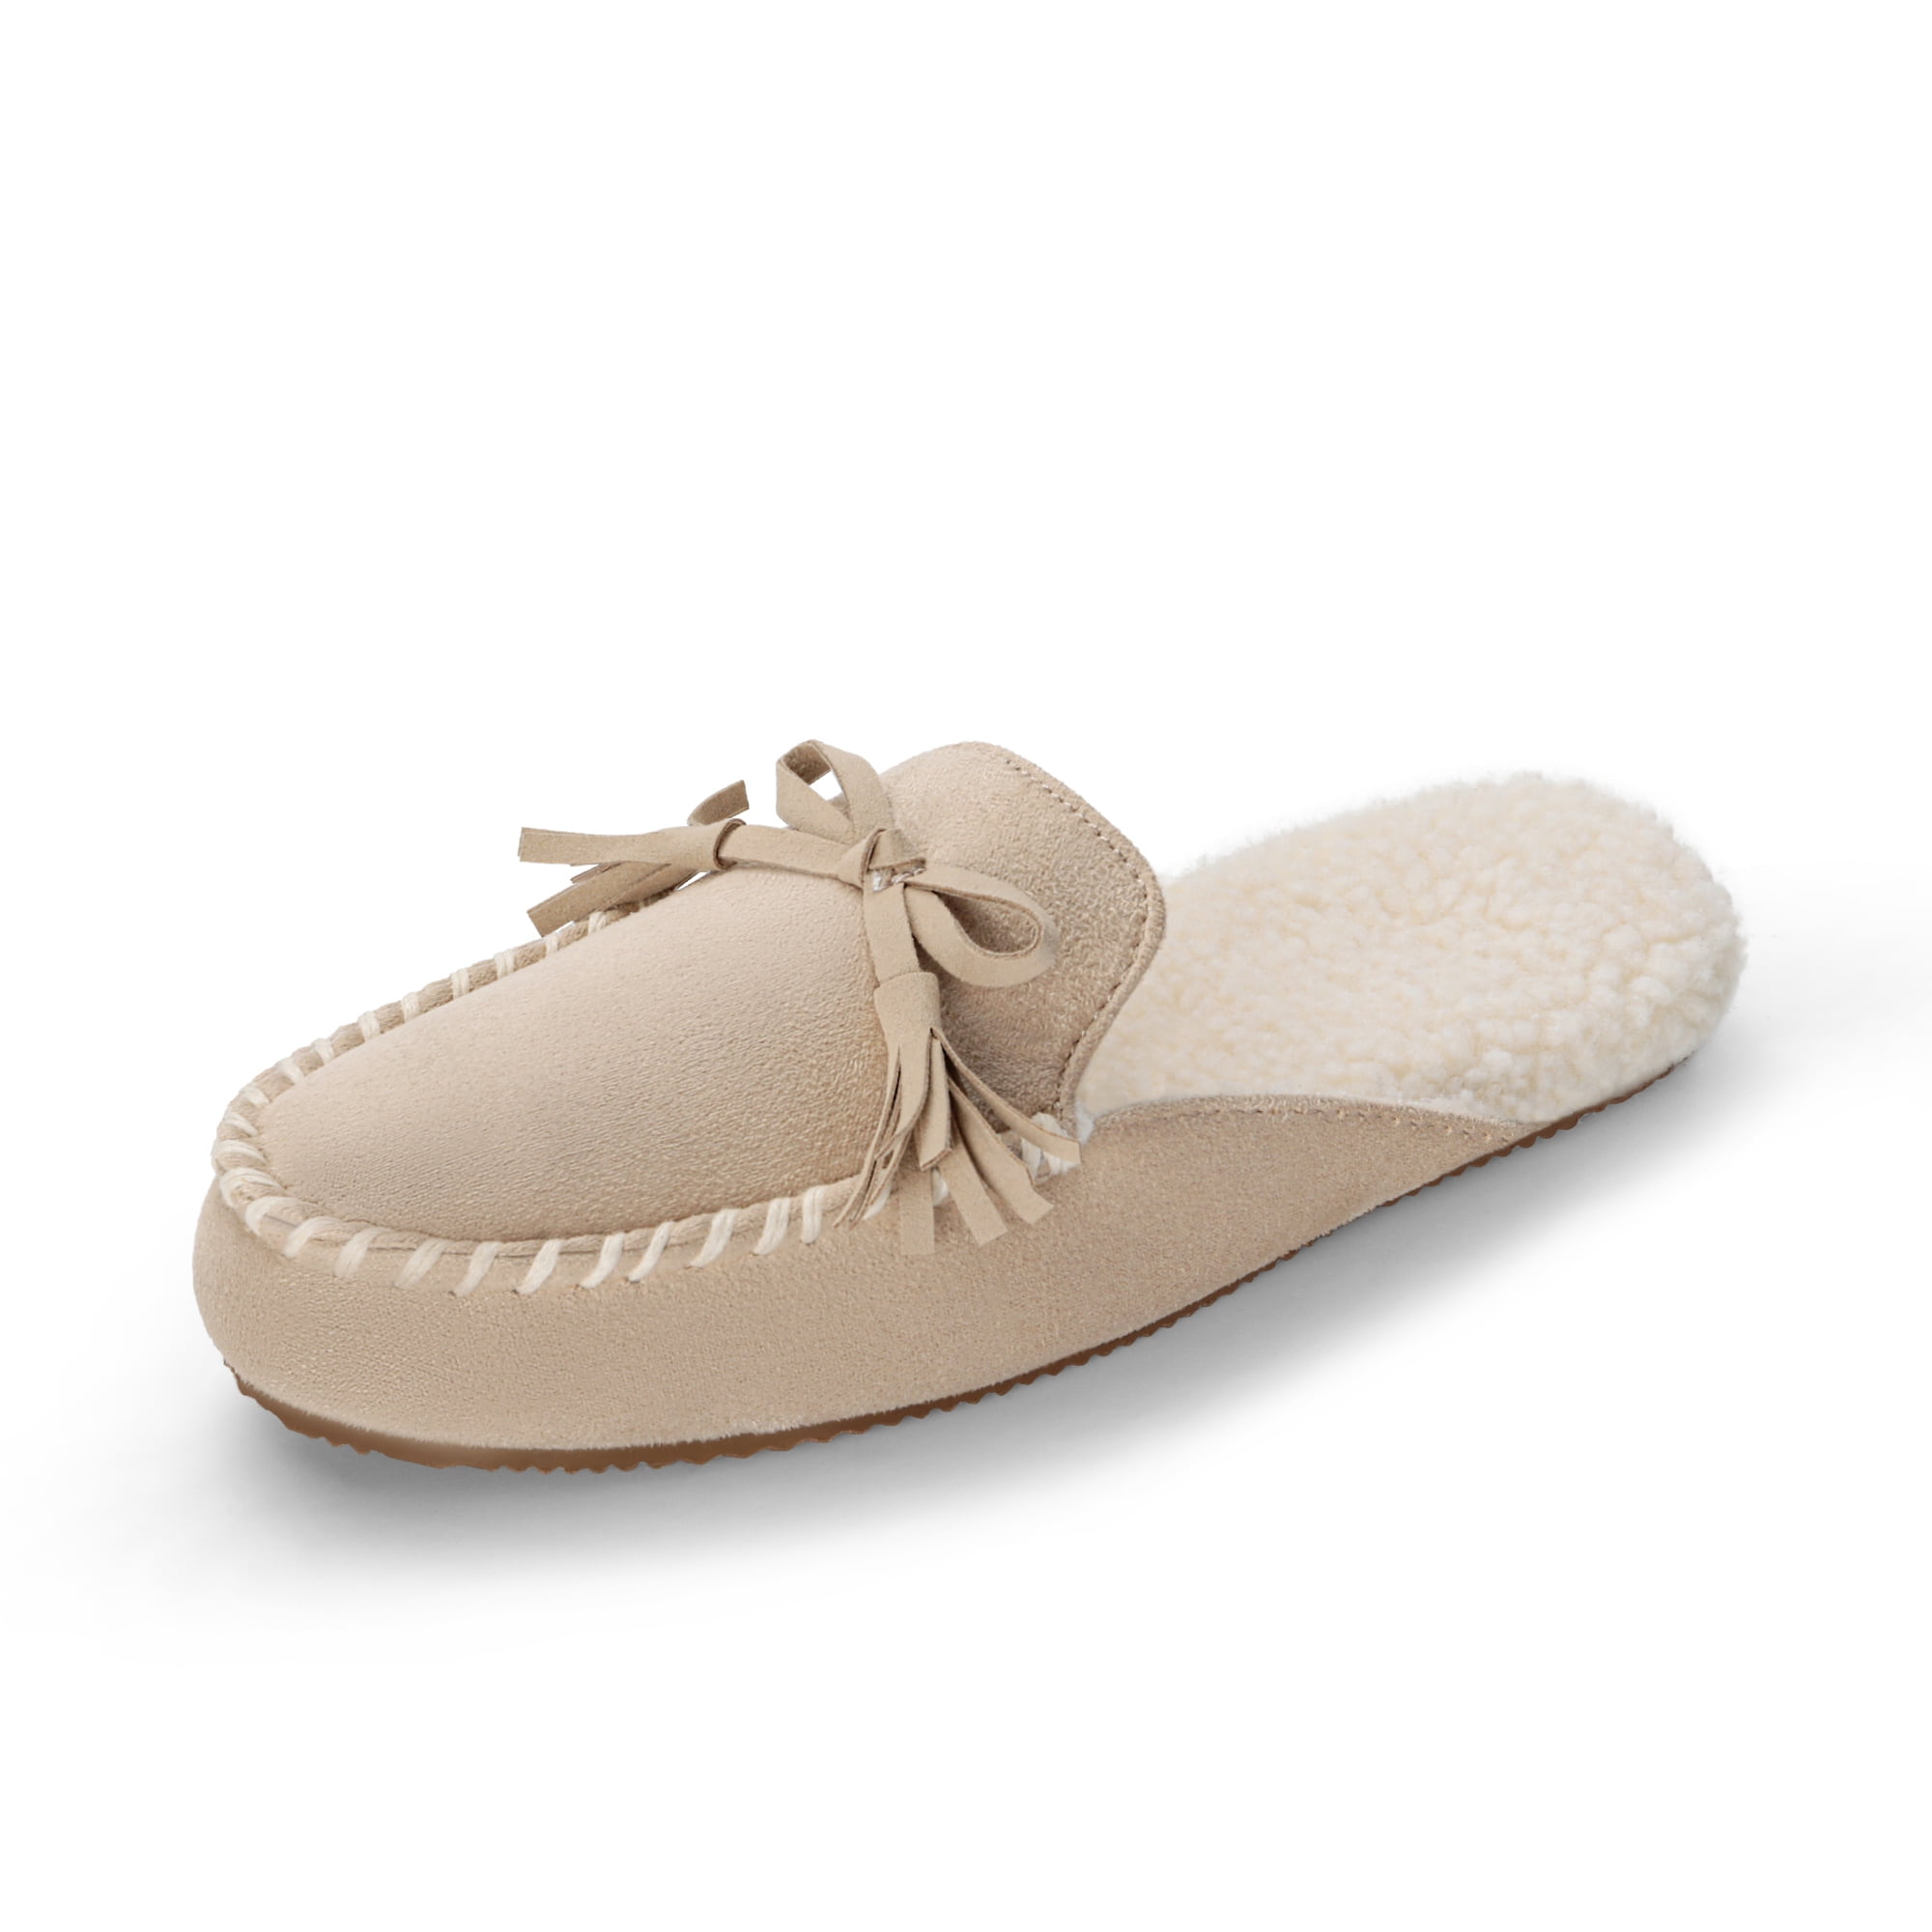 Dream Pairs Women's Memory Foam Moccasin Cozy House Slippers with Fuzzy ...